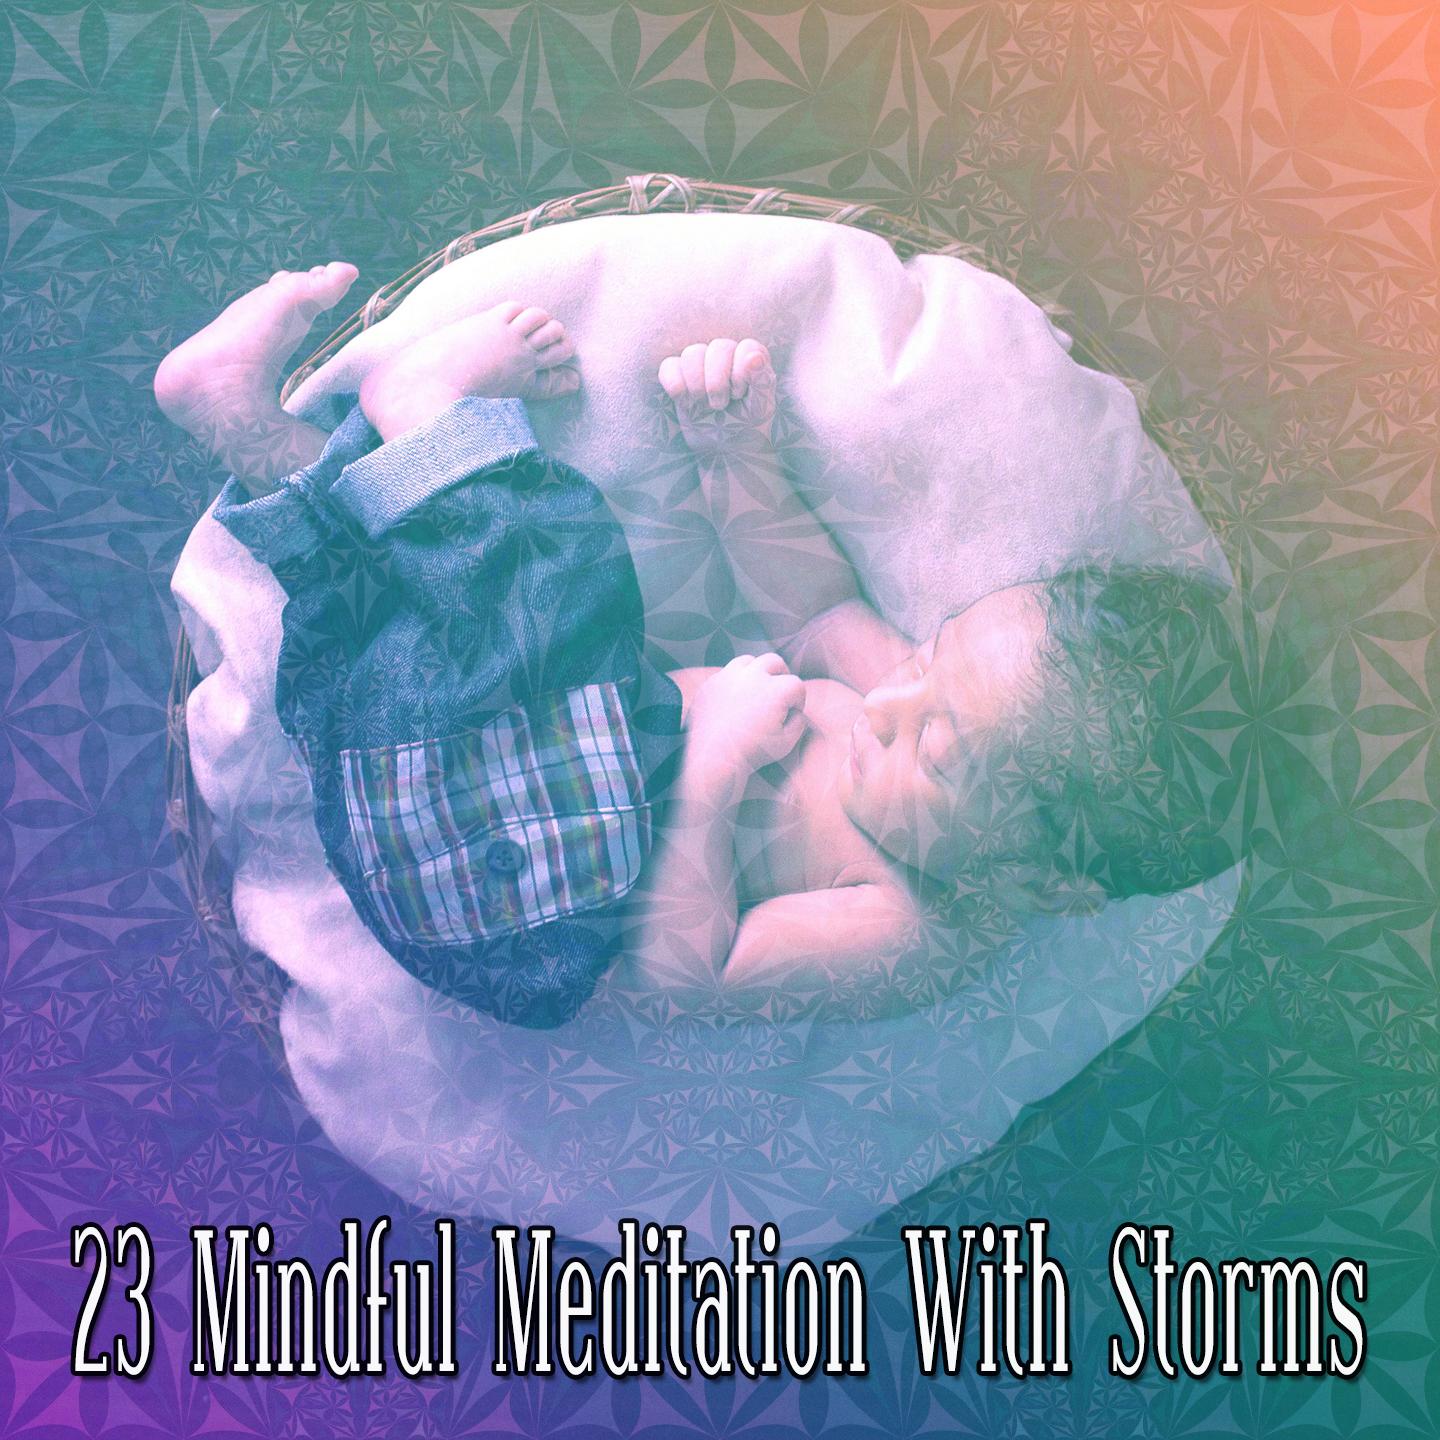 23 Mindful Meditation with Storms